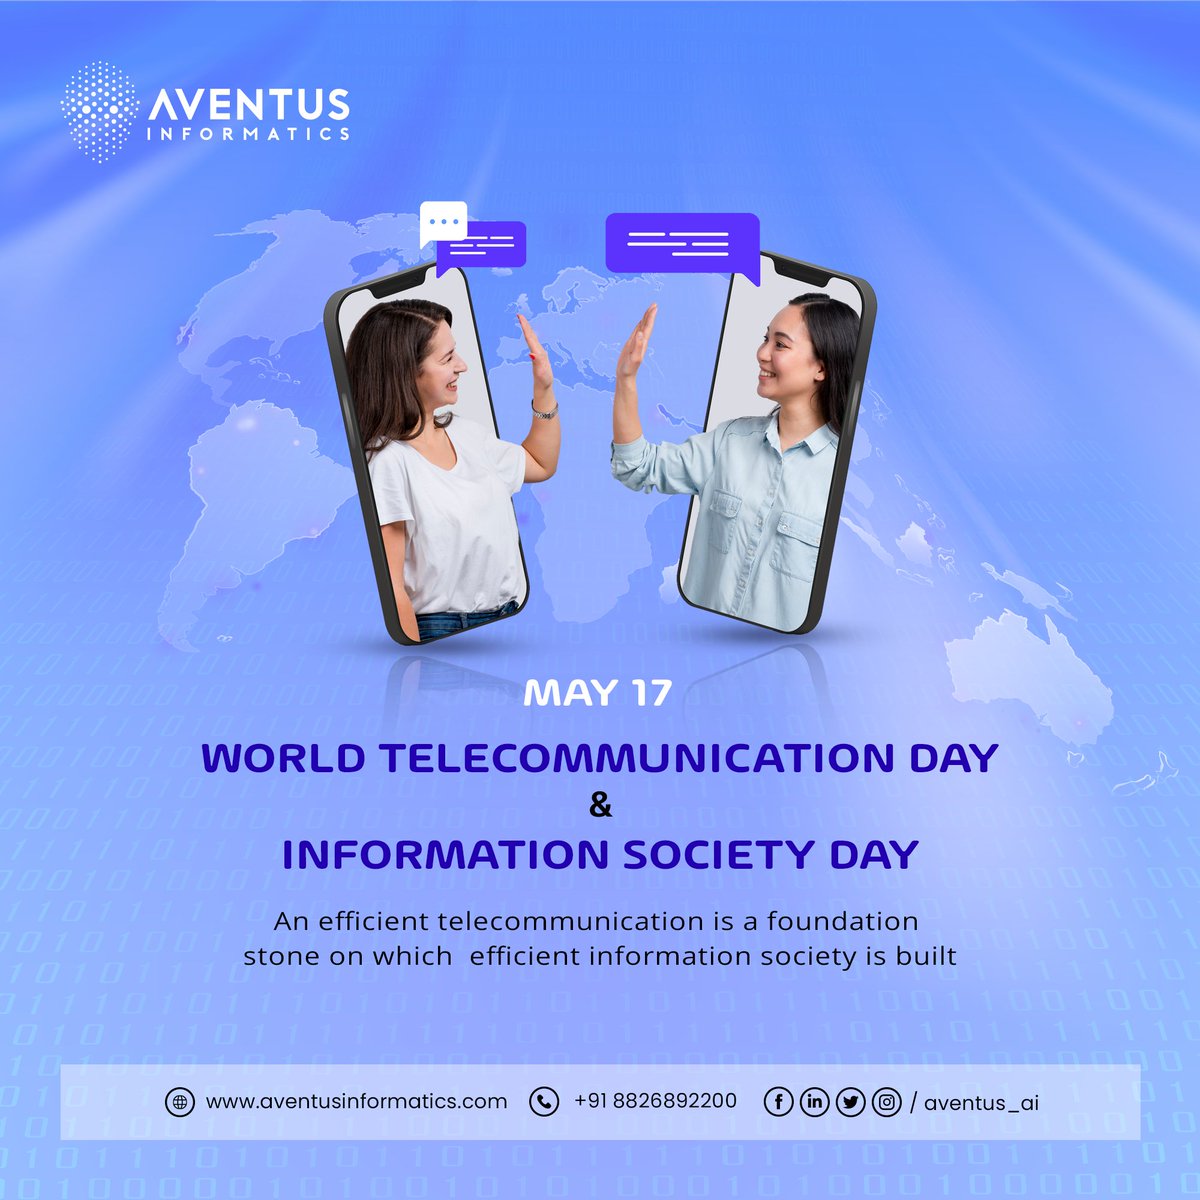 We have to celebrate the incredible advancements in technology and telecommunications that have transformed the way we connect each other and have made our lives much easier and advanced.
Happy Telecommunication and Information Society Day!
#telecommunication #informationsociety